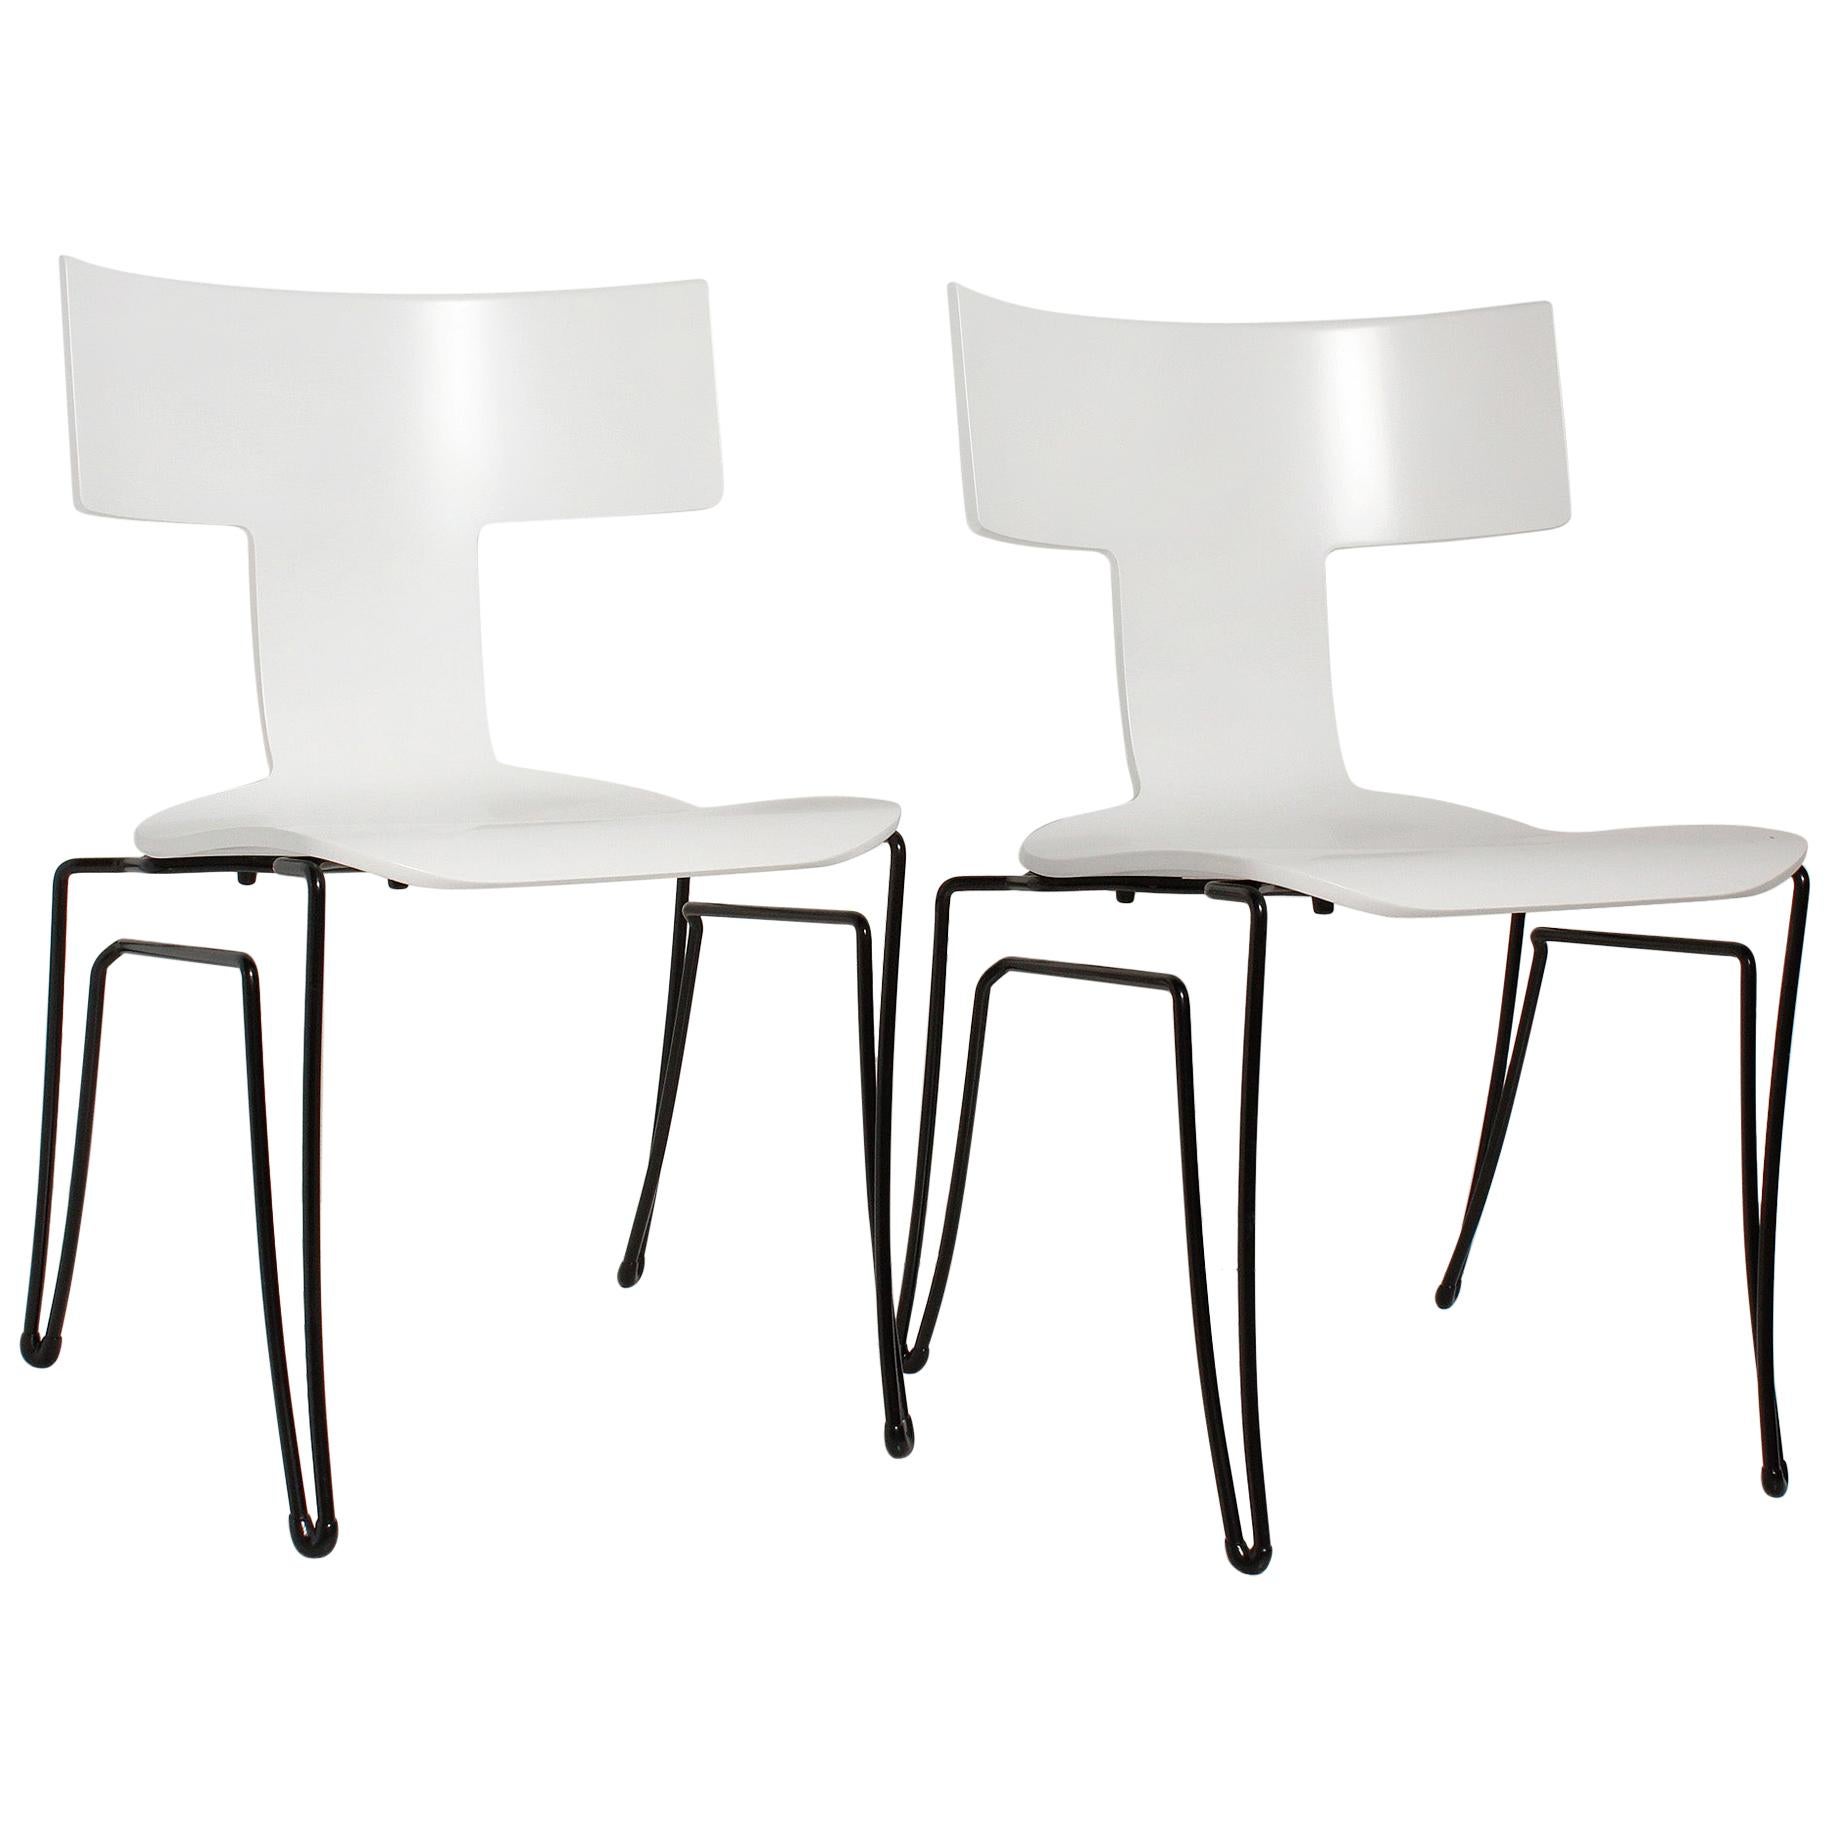 White Anziano Chairs by John Hutton for Donghia, circa 1985